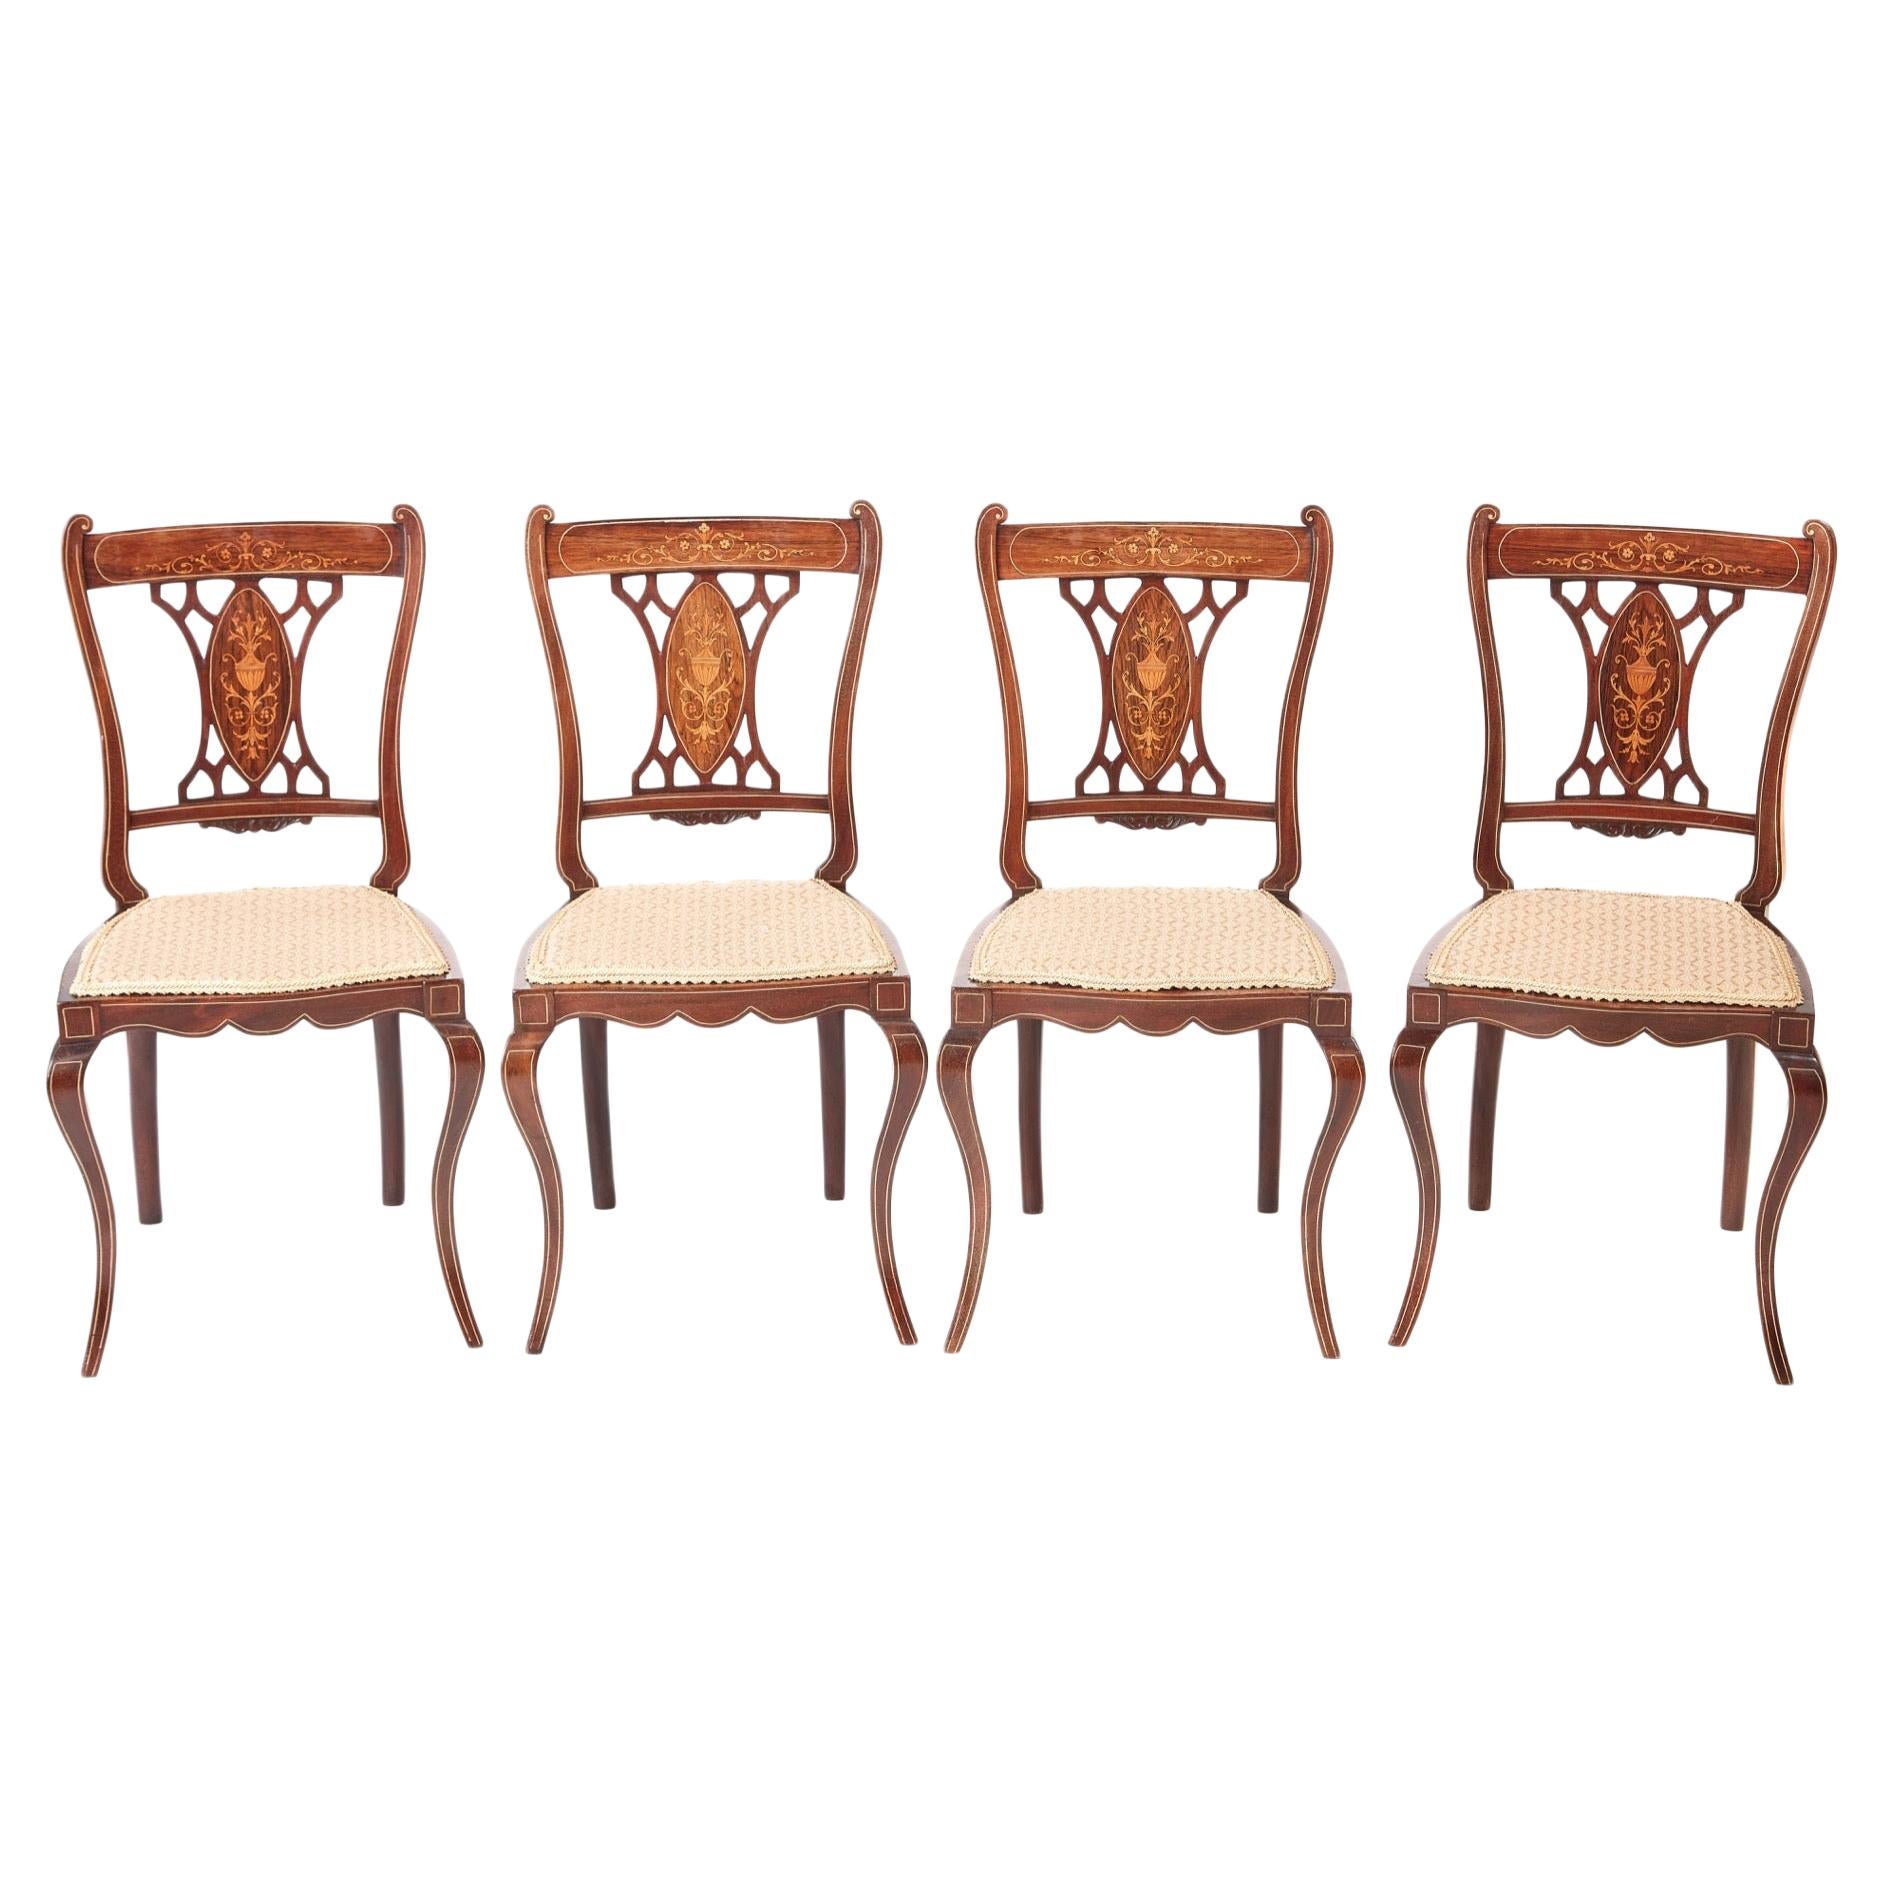 Antique Set of Four Edwardian Rosewood Inlaid Dining Chairs